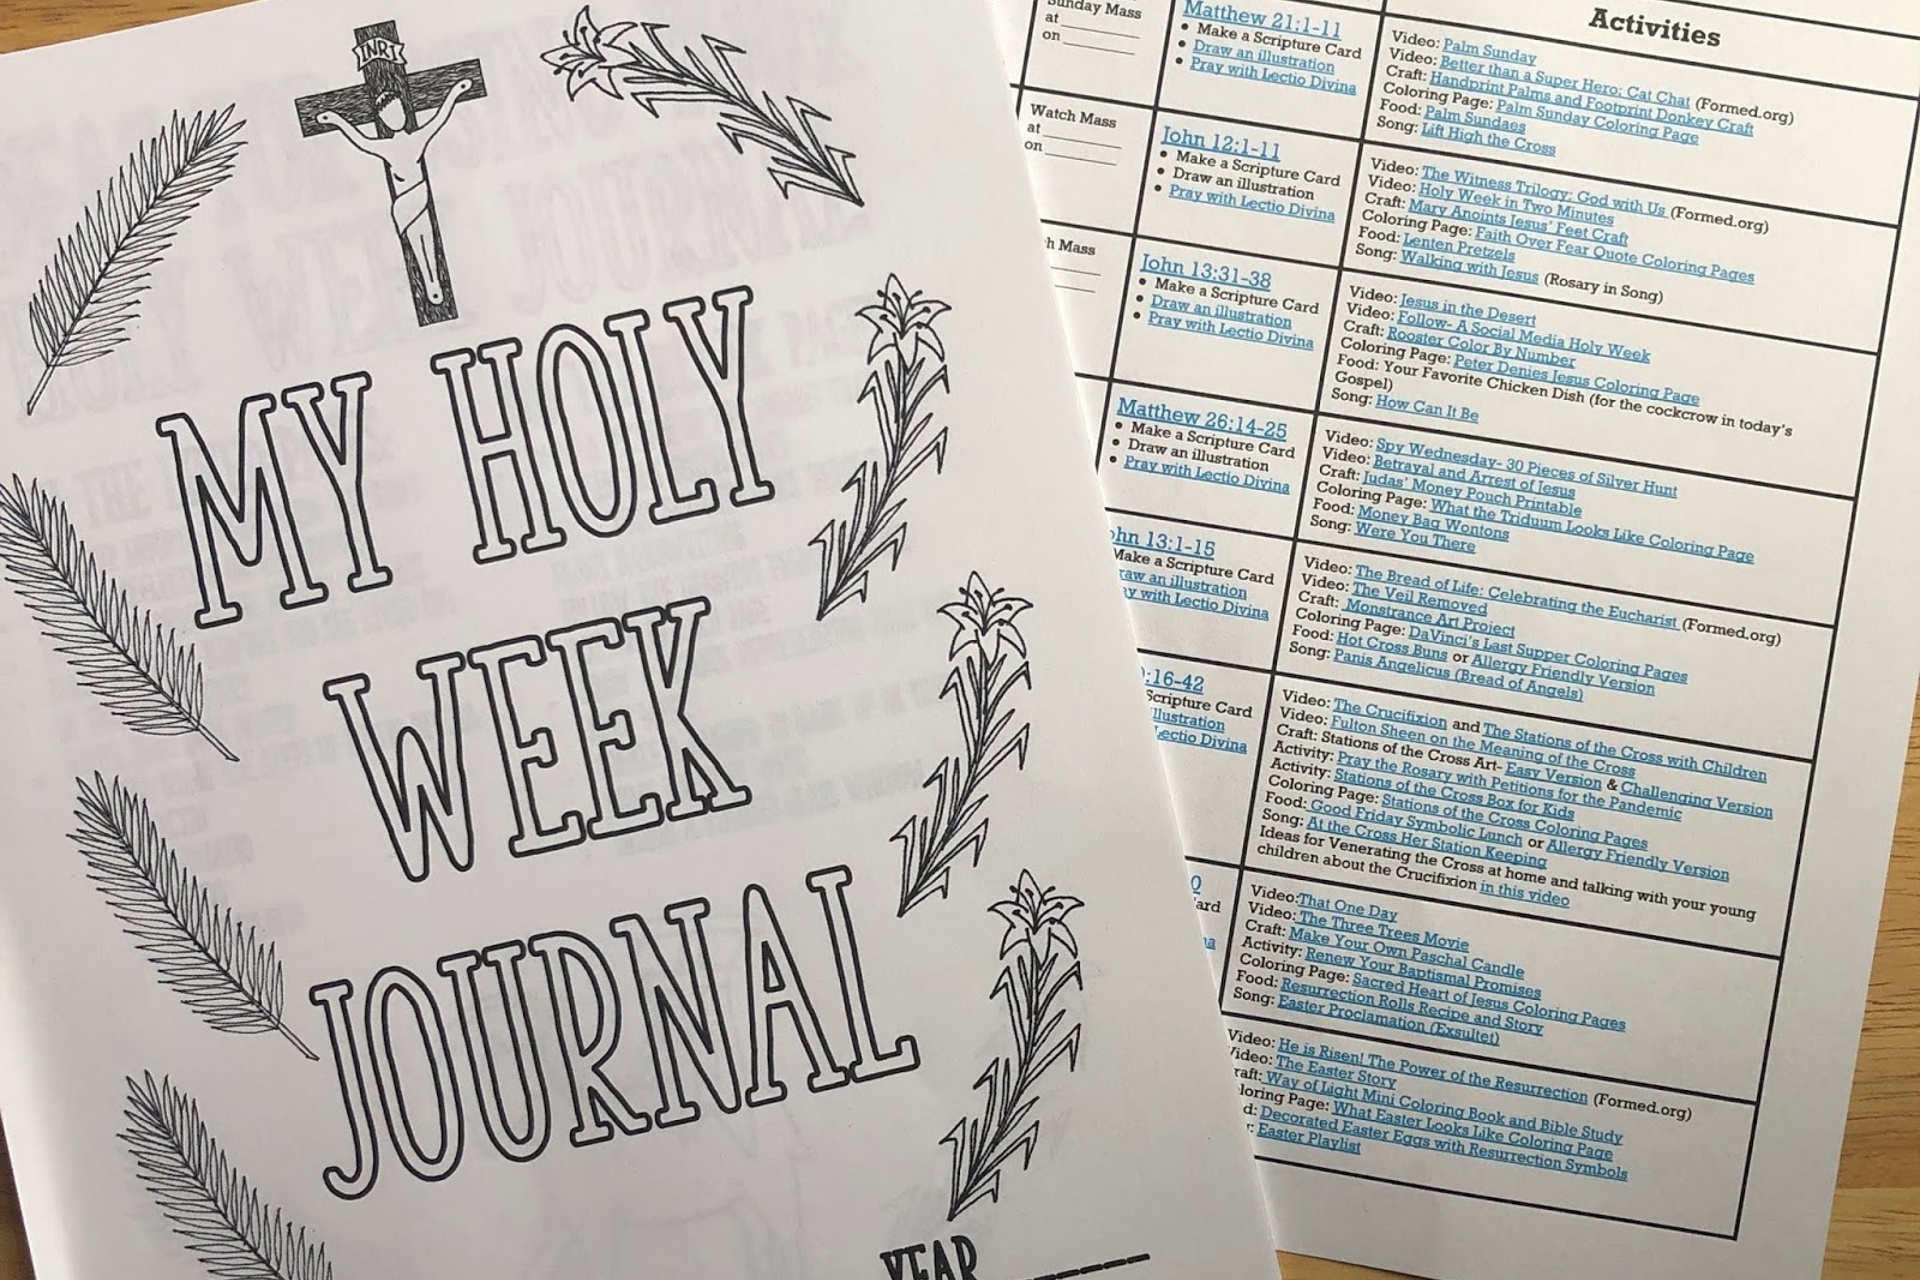 Holy Week (at Home) Timetable and Resources